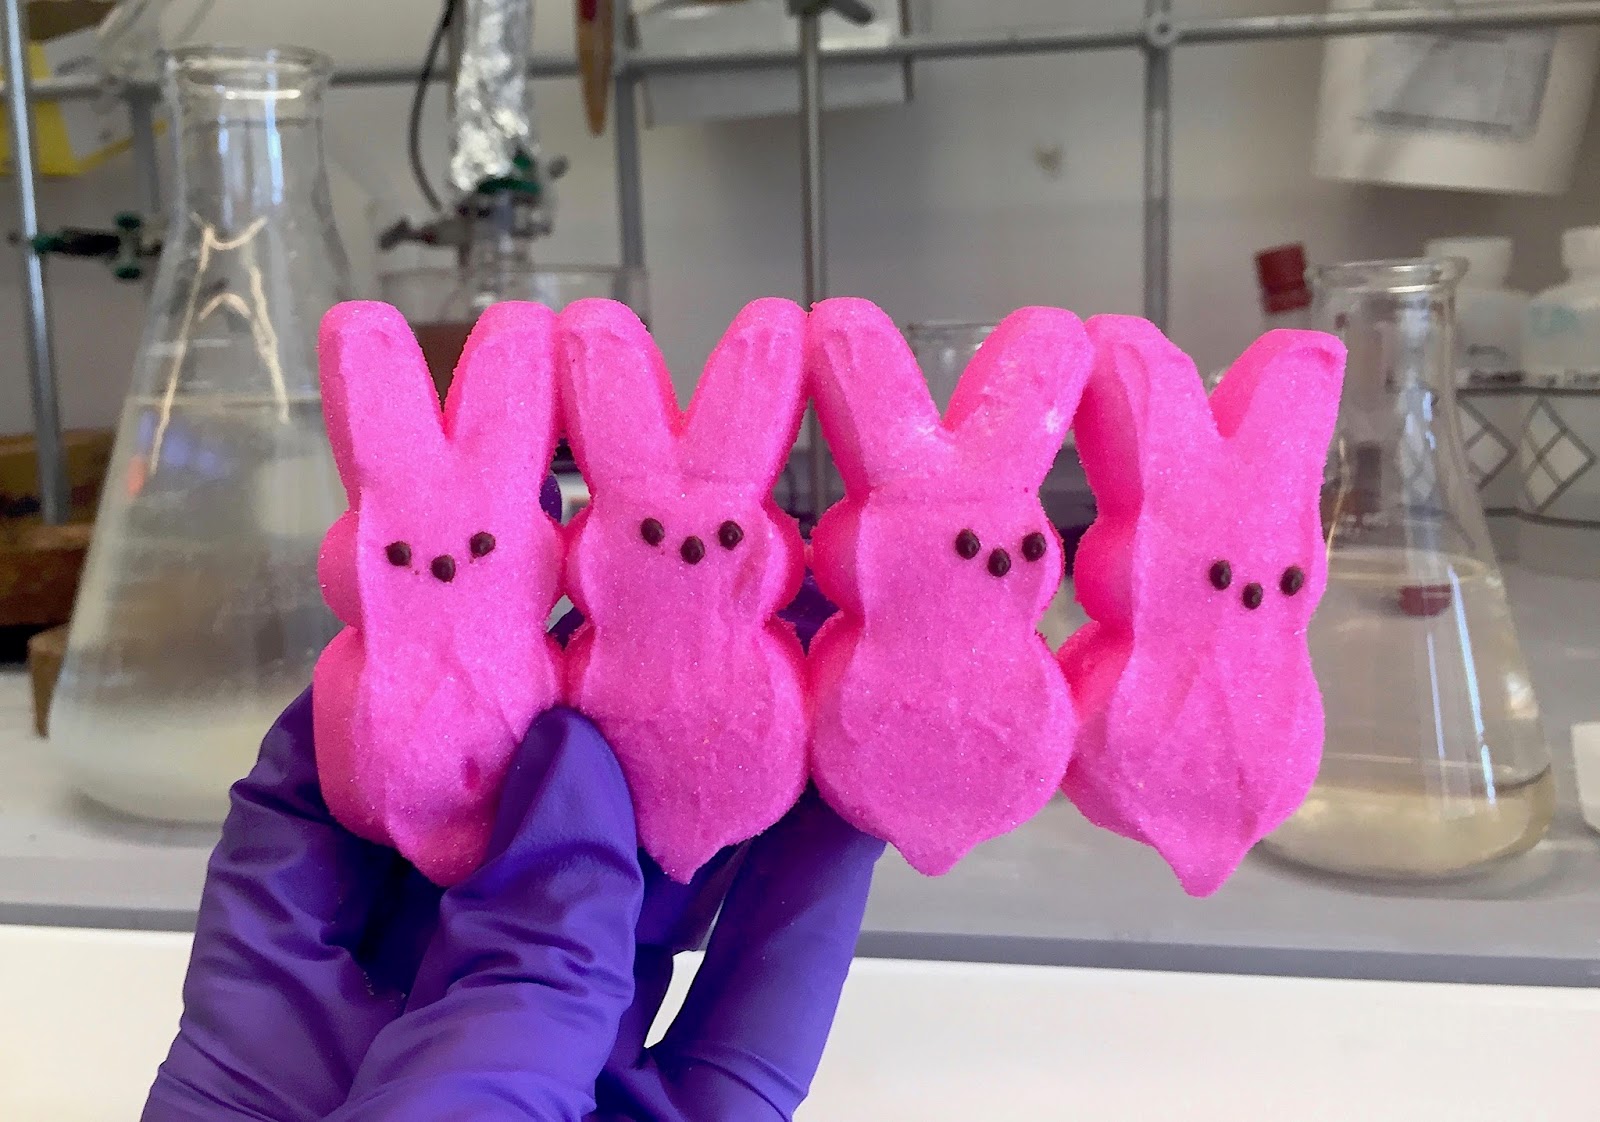 Peeps in a classroom science experiment